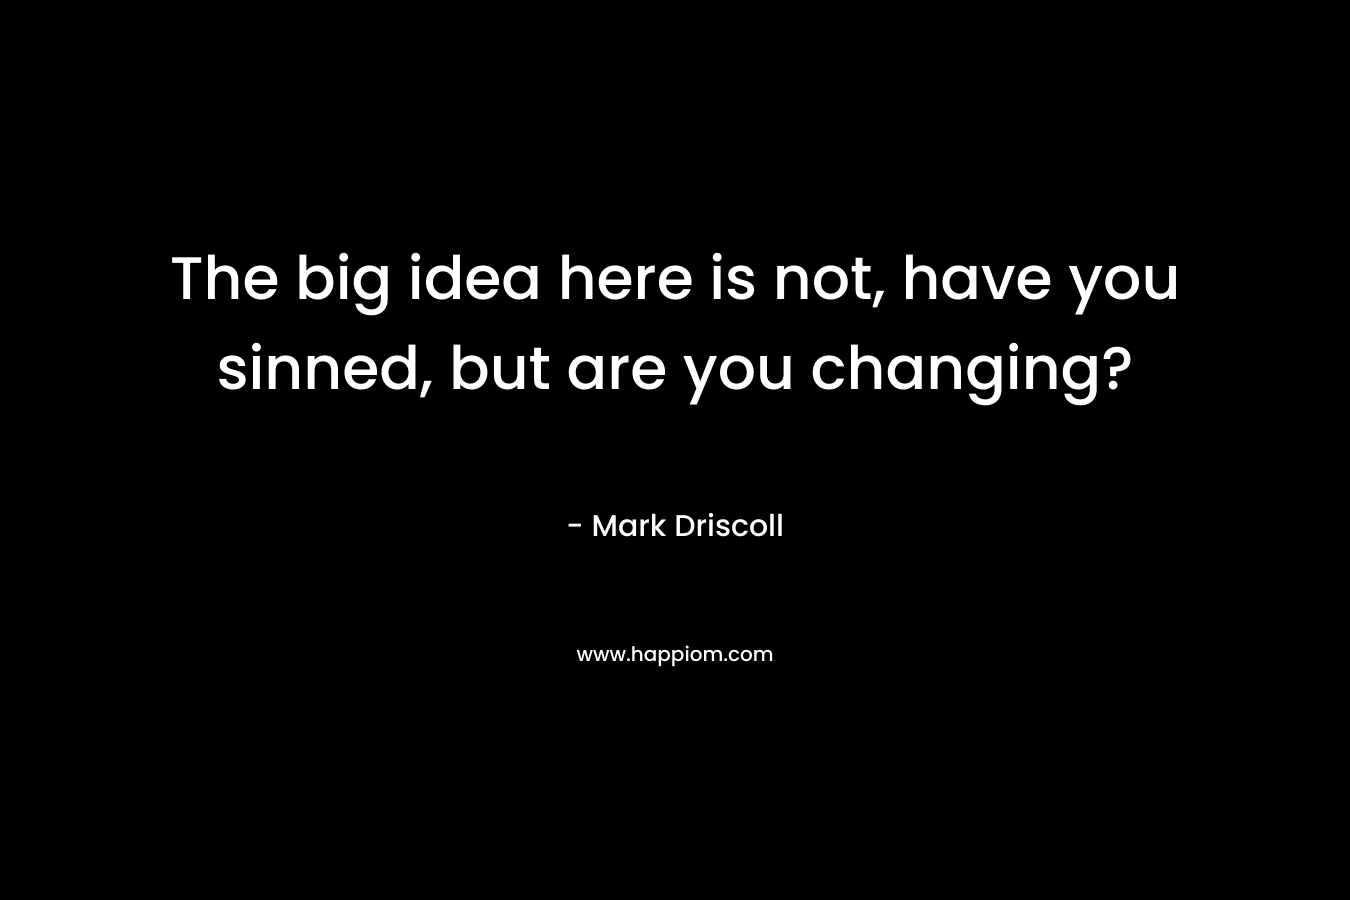 The big idea here is not, have you sinned, but are you changing?